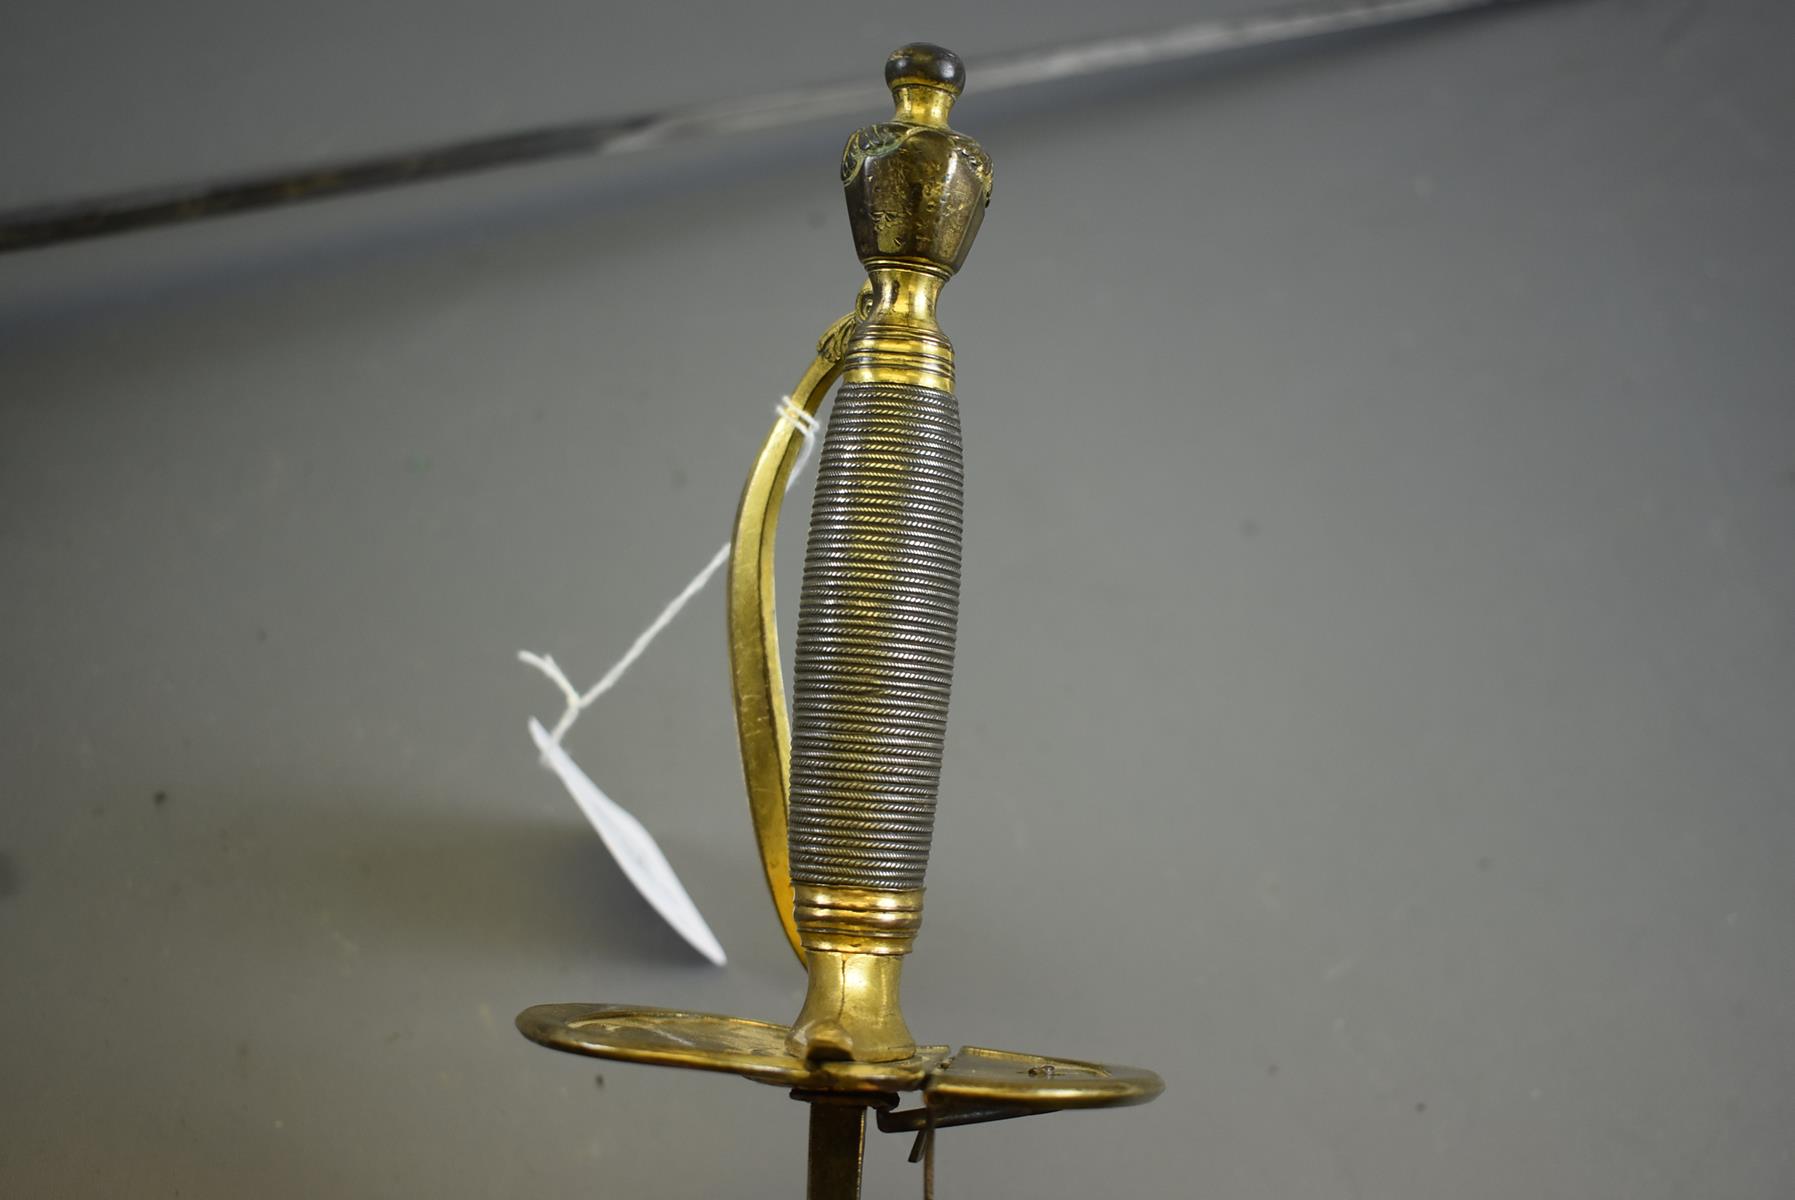 A 1796 PATTERN PRINCE OF WALES VOLUNTEERS OFFICER'S SWORD, 80.75cm blade decorated with scrolling - Image 13 of 14